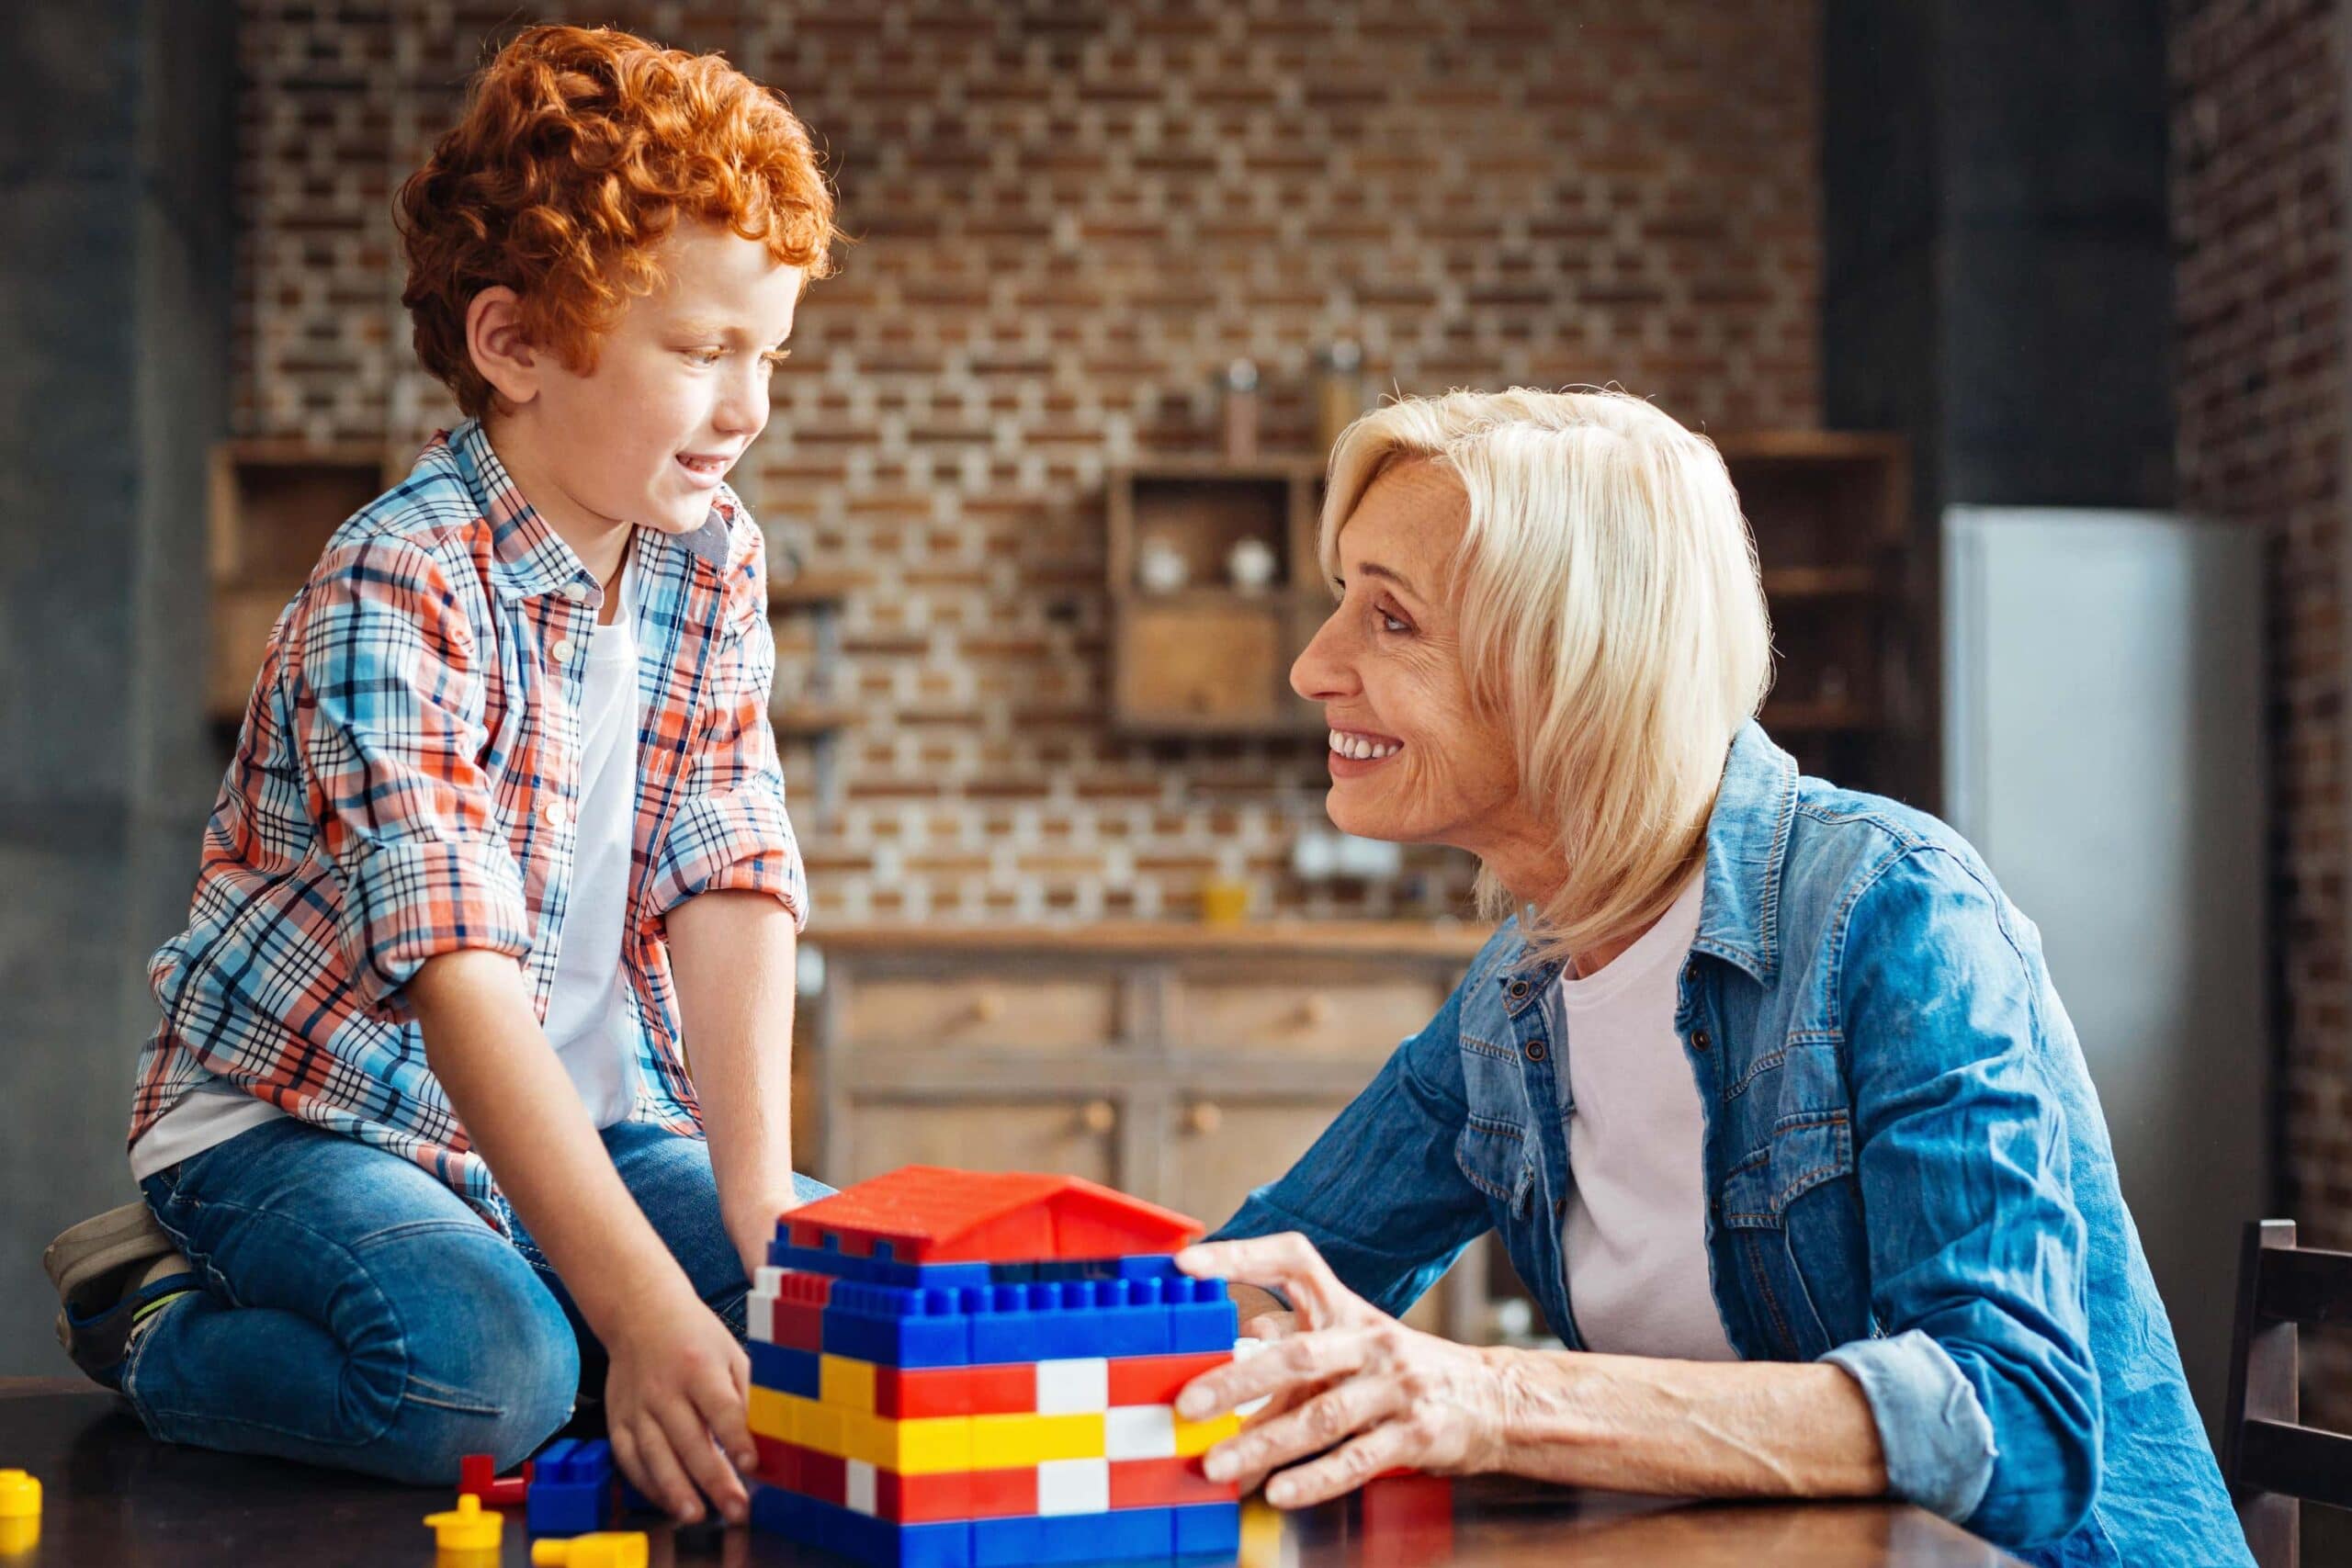 Woman smiles at child over lego bricks scaled